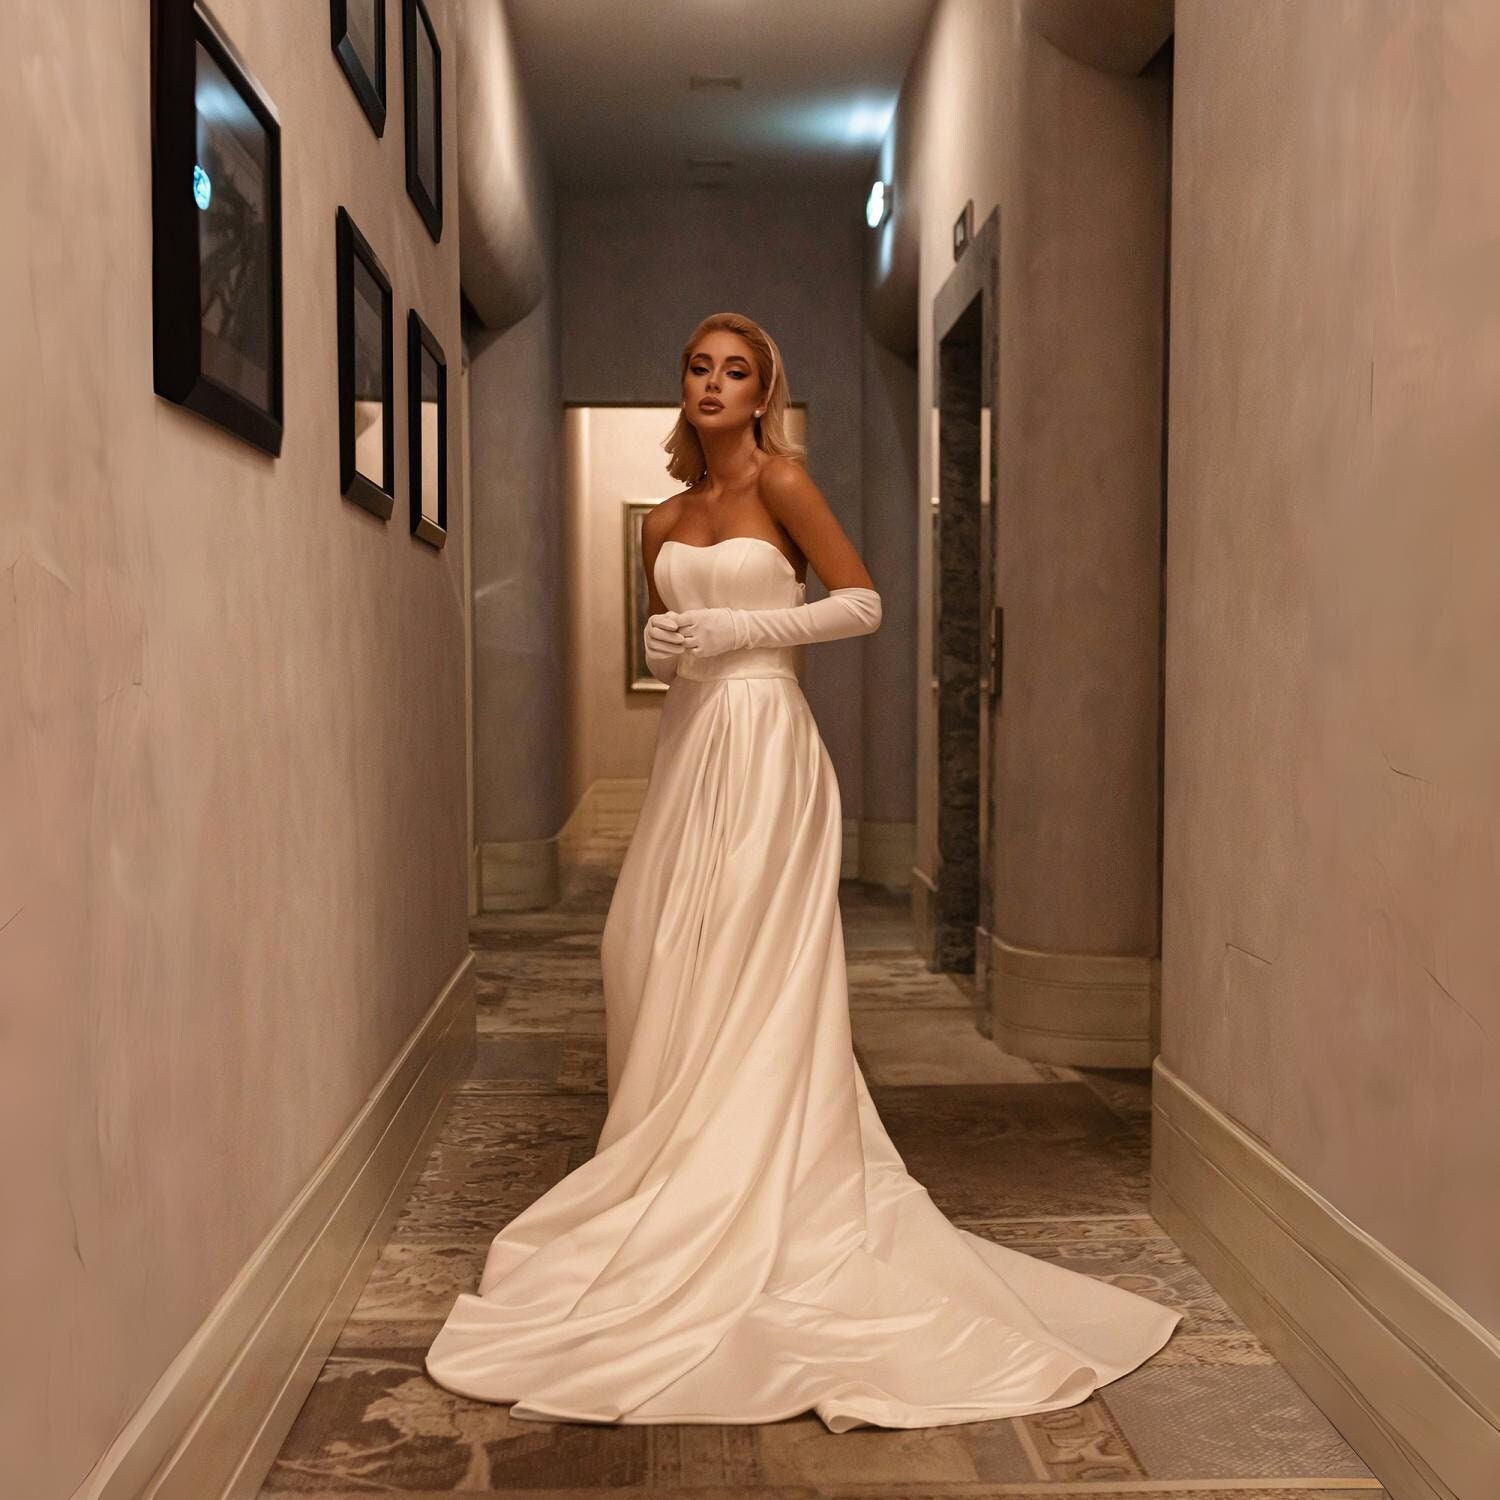 offers wholesaler satin Lilou wedding dress, Hollywood inspired